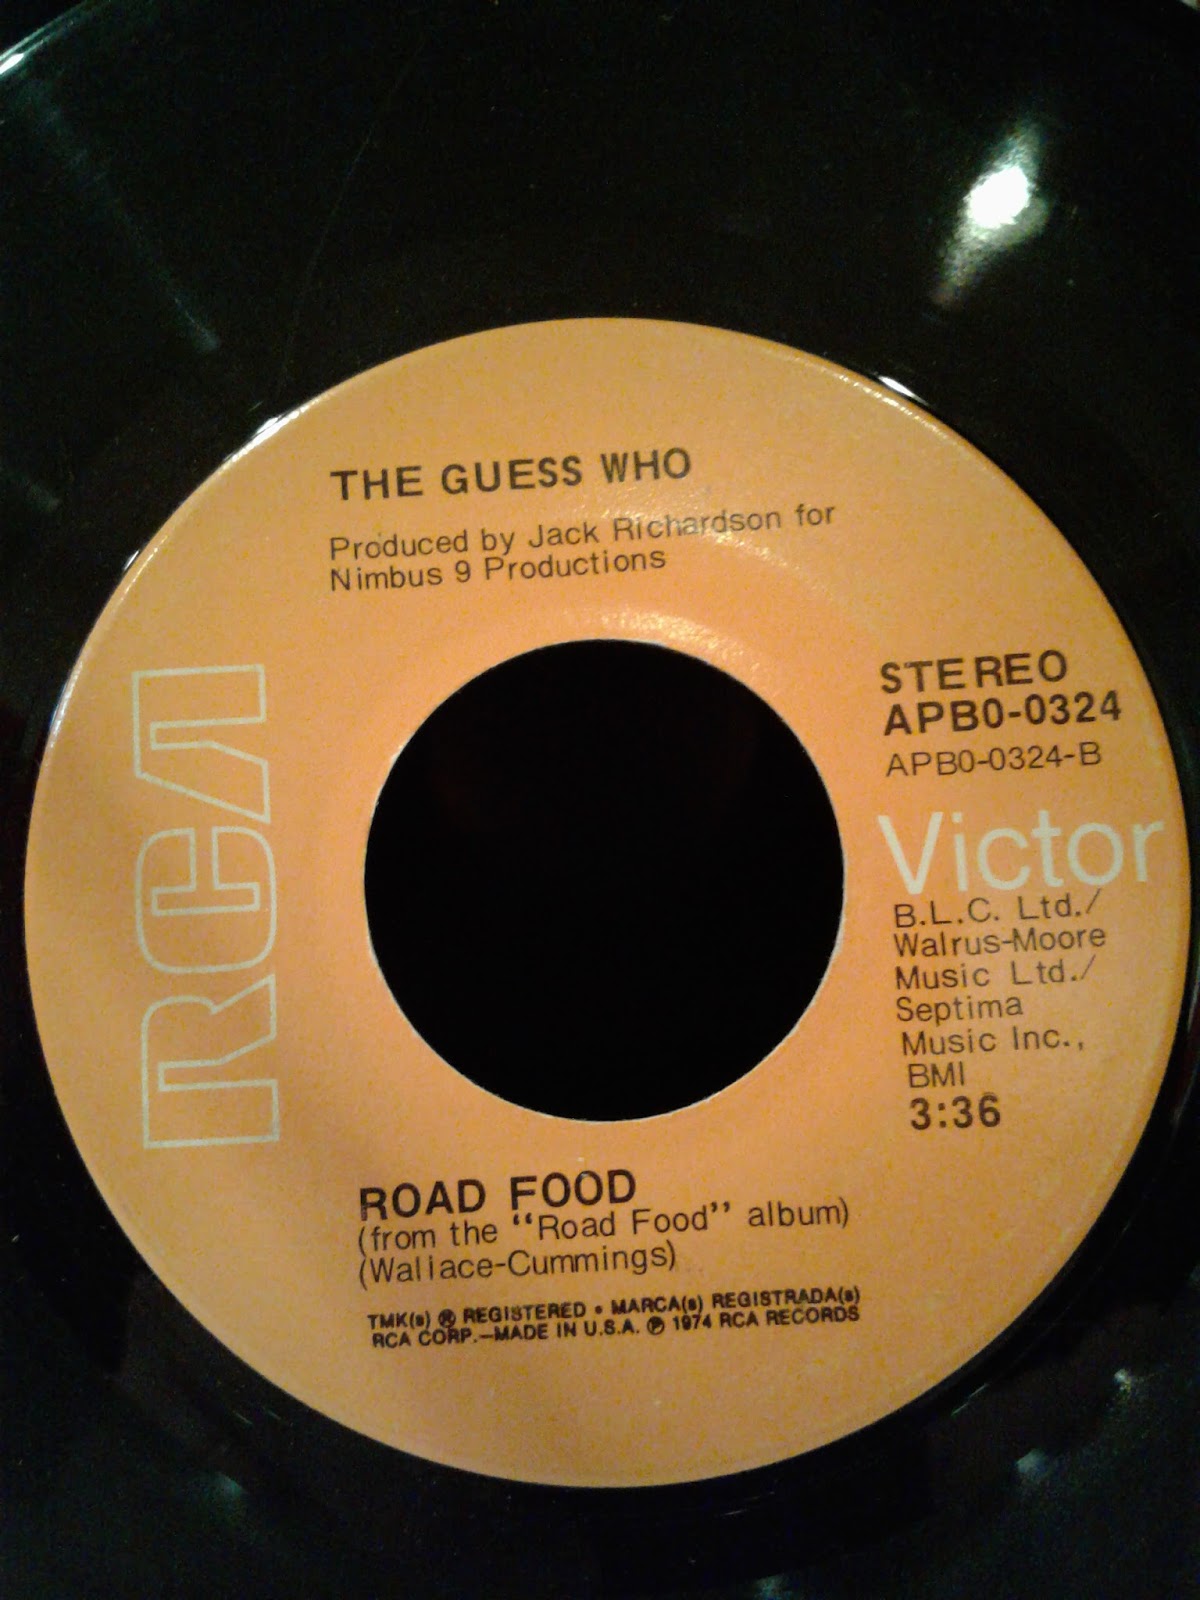 Optøjer parkere Offentliggørelse Ten Records: A Song A Day: The Guess Who, "Road Food"